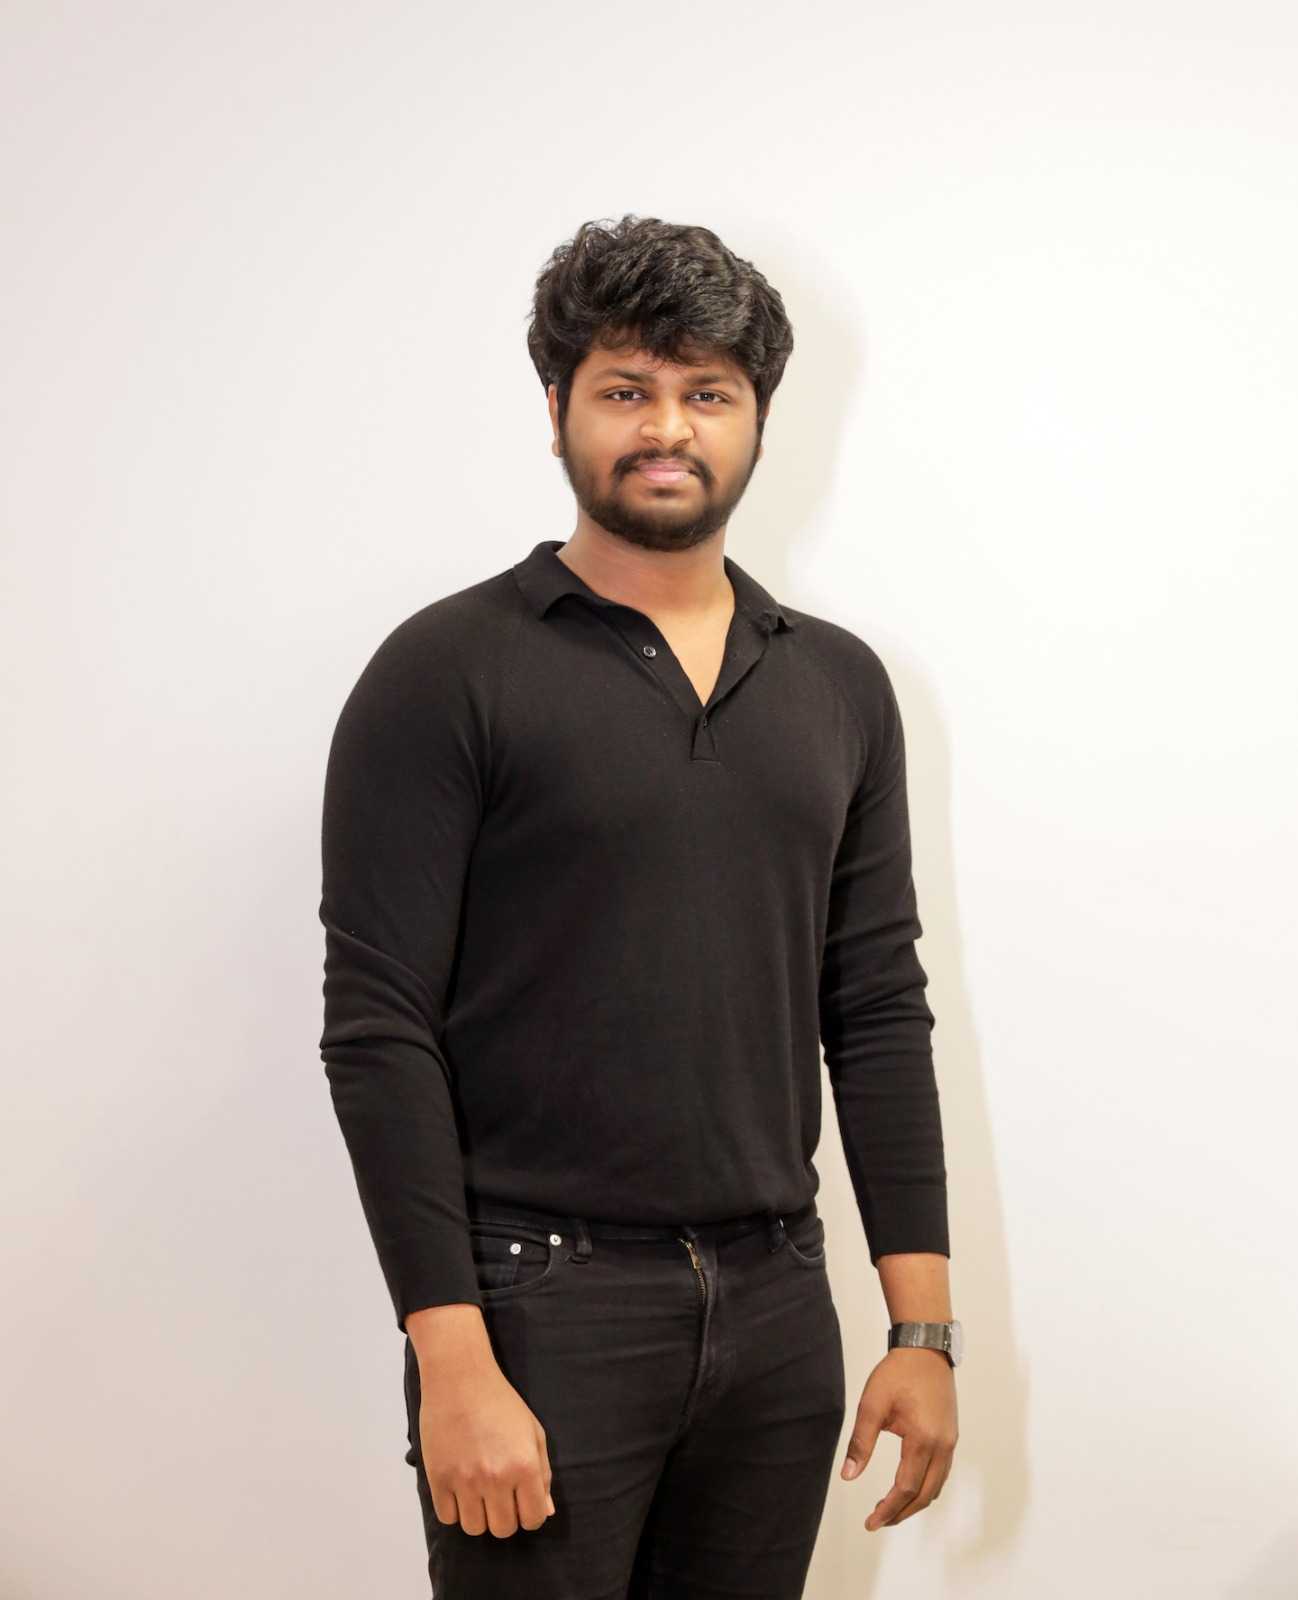 Siddharth UR is a Chennai-based designer who is constantly looking to solve everyday problems through simple design